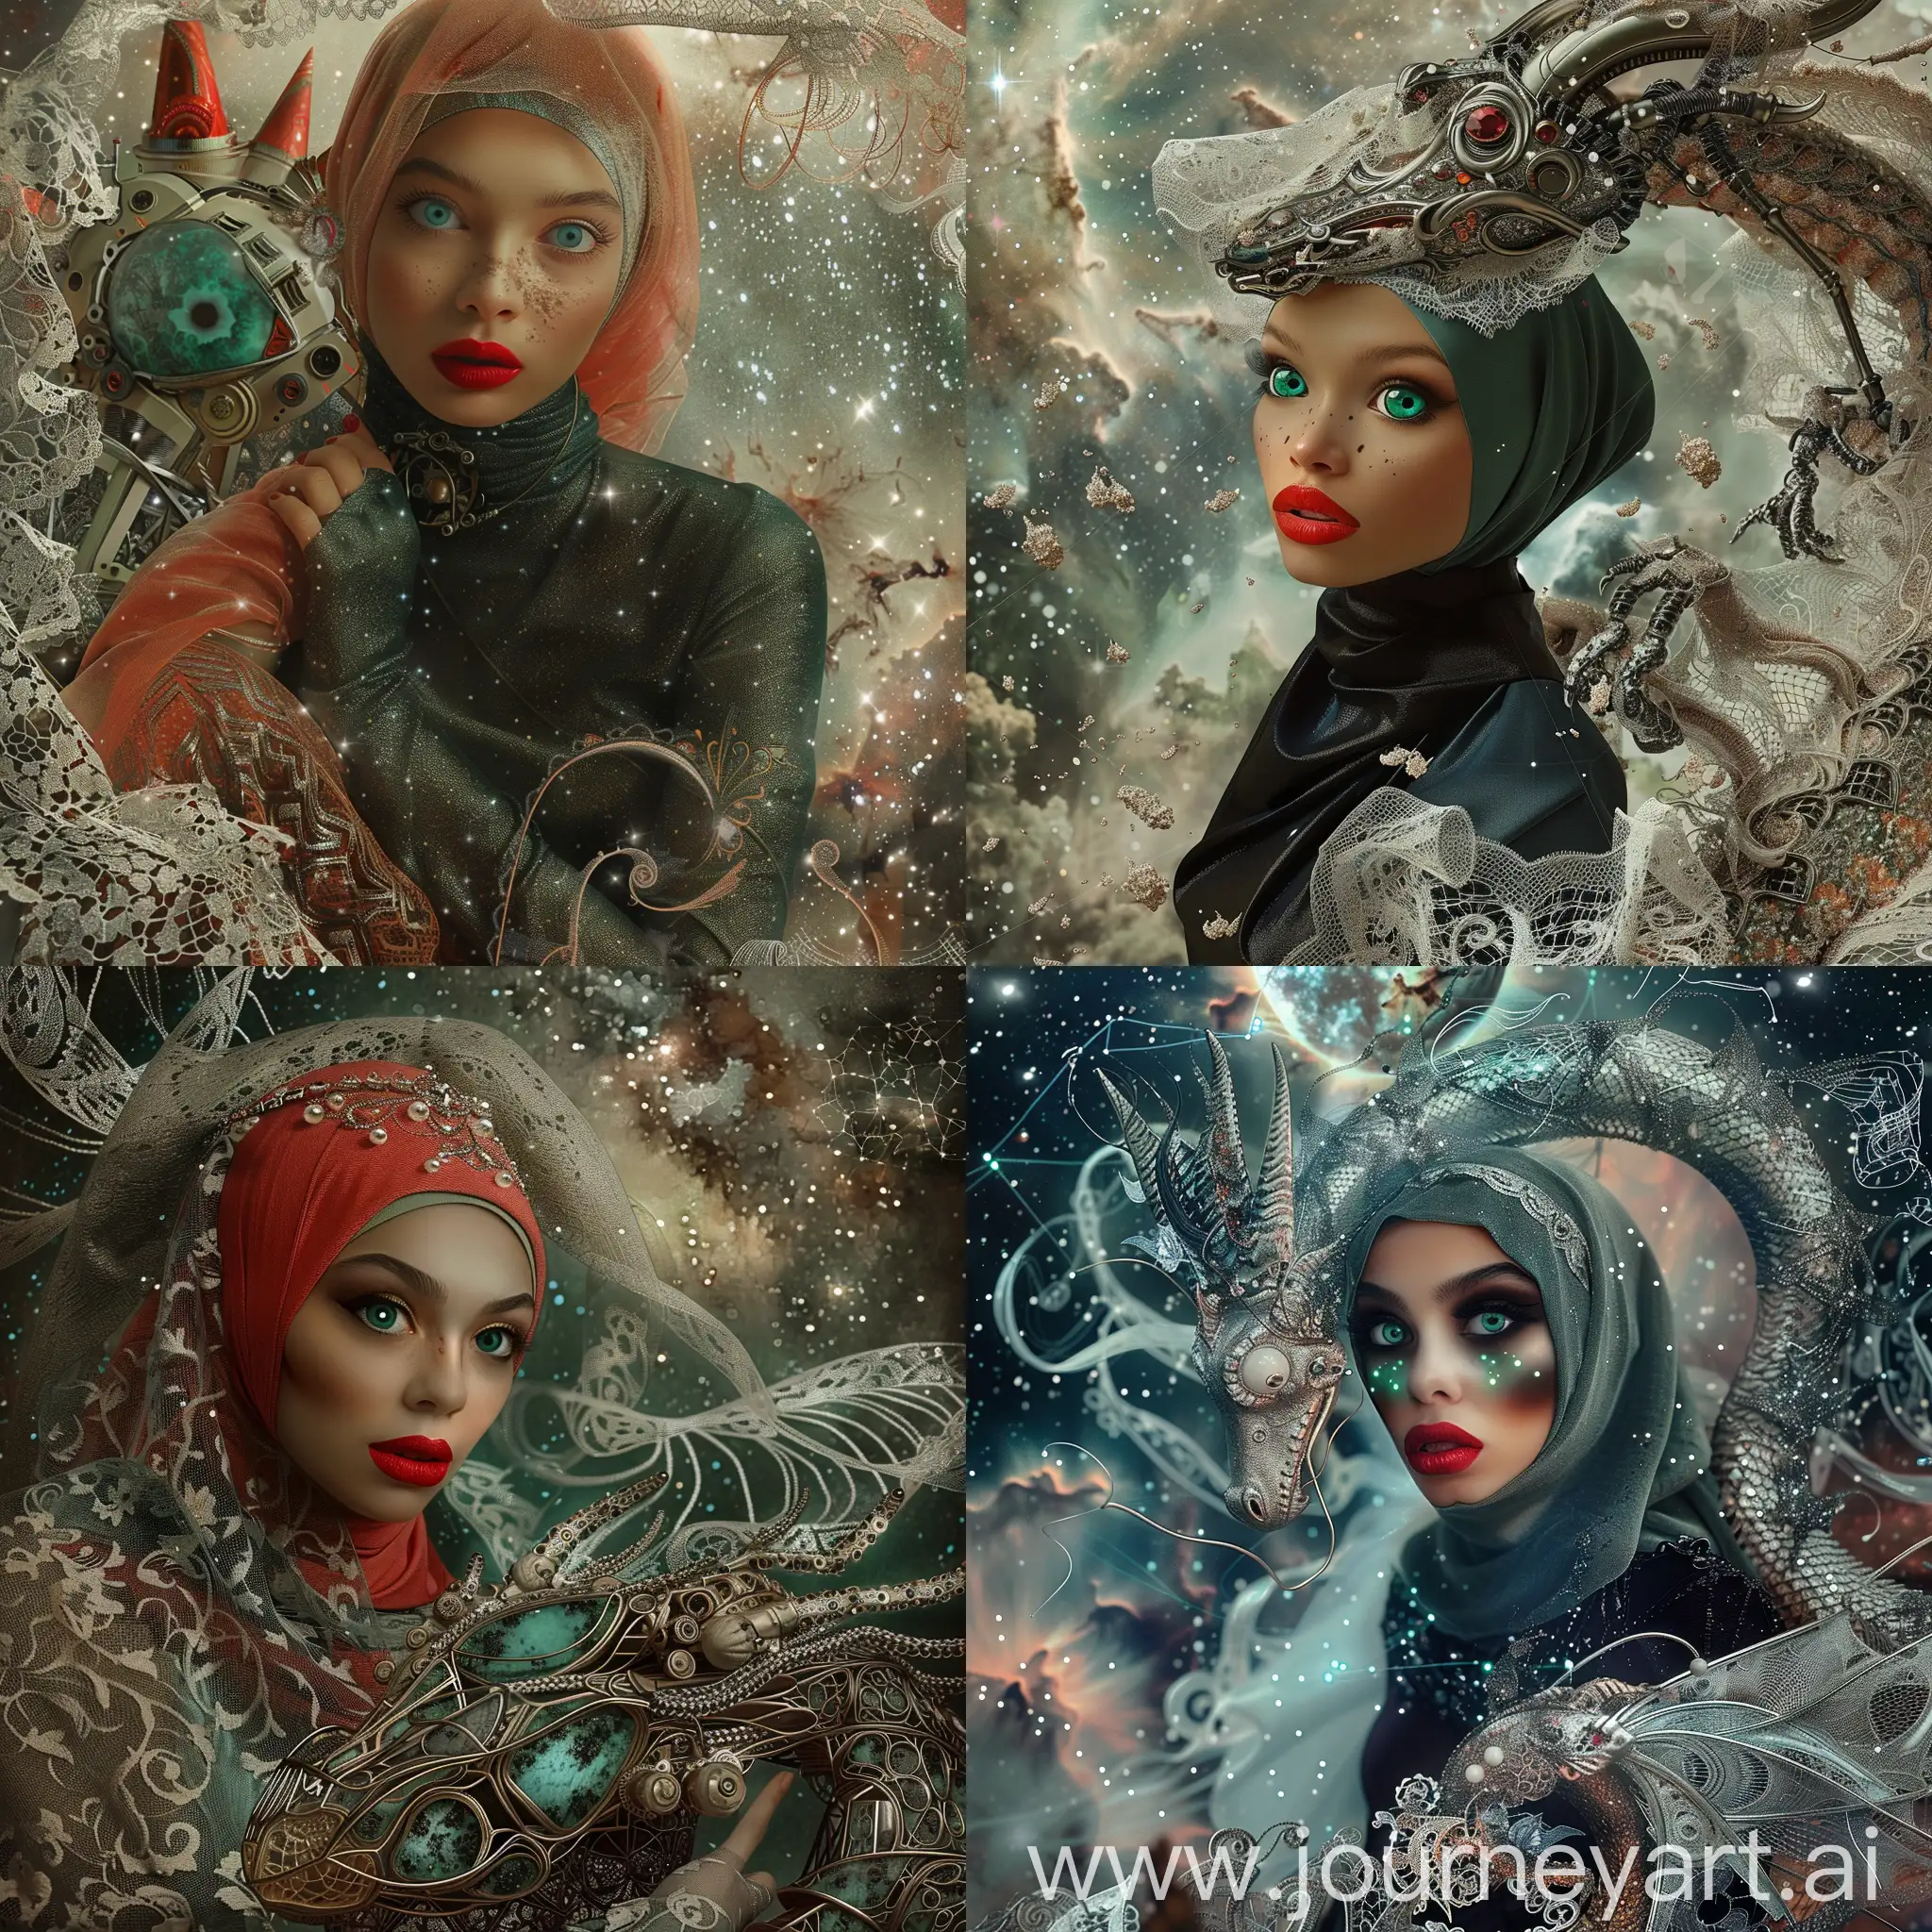 Surreal-Portrait-of-a-Beautiful-Muslimah-Riding-a-Mythical-Mechanical-Dragon-in-a-Galactic-Digital-Painting